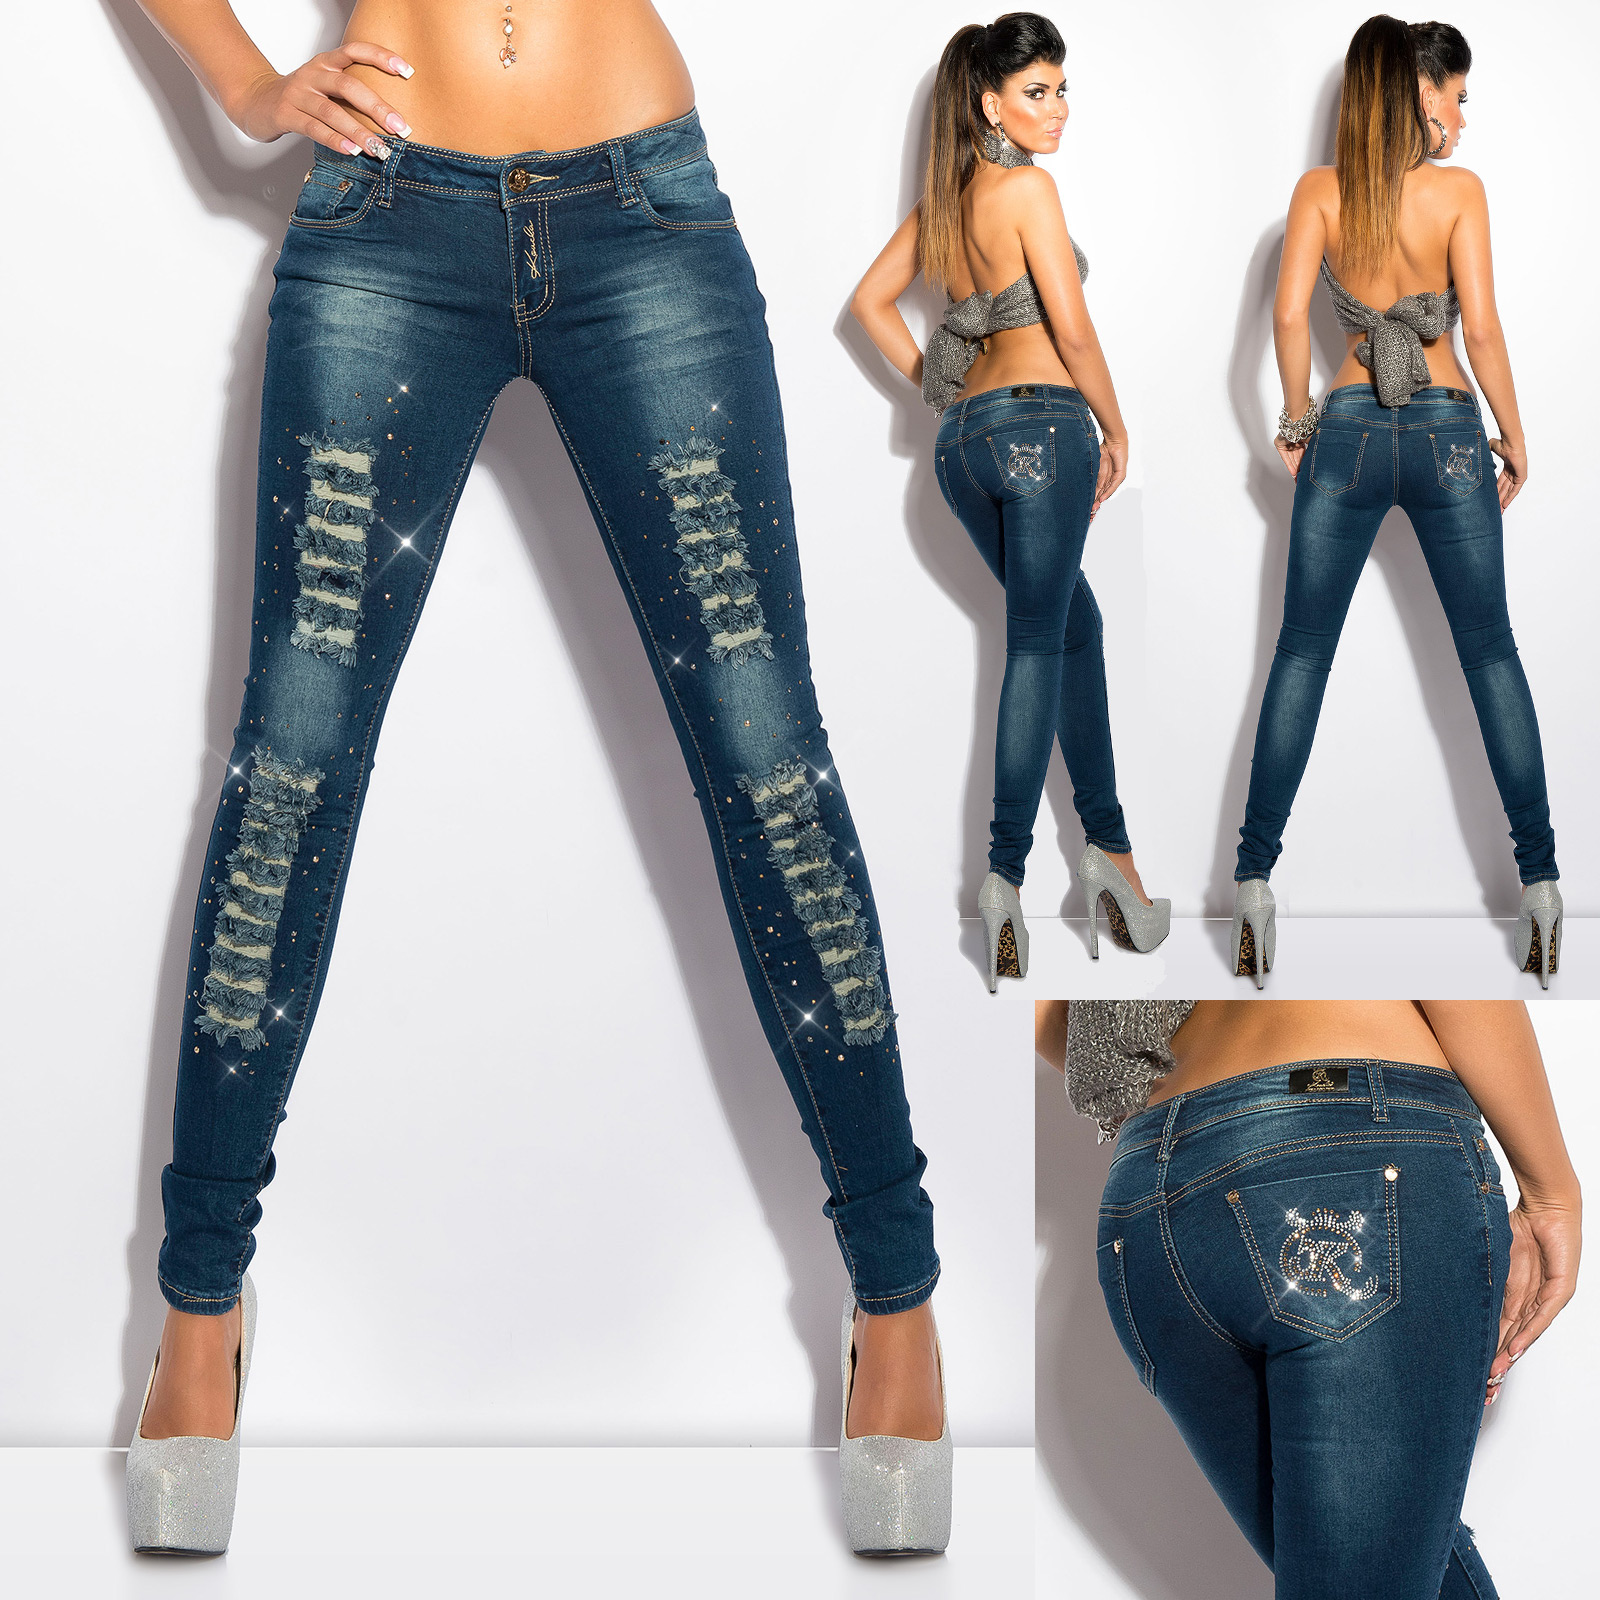 low rise jeans back